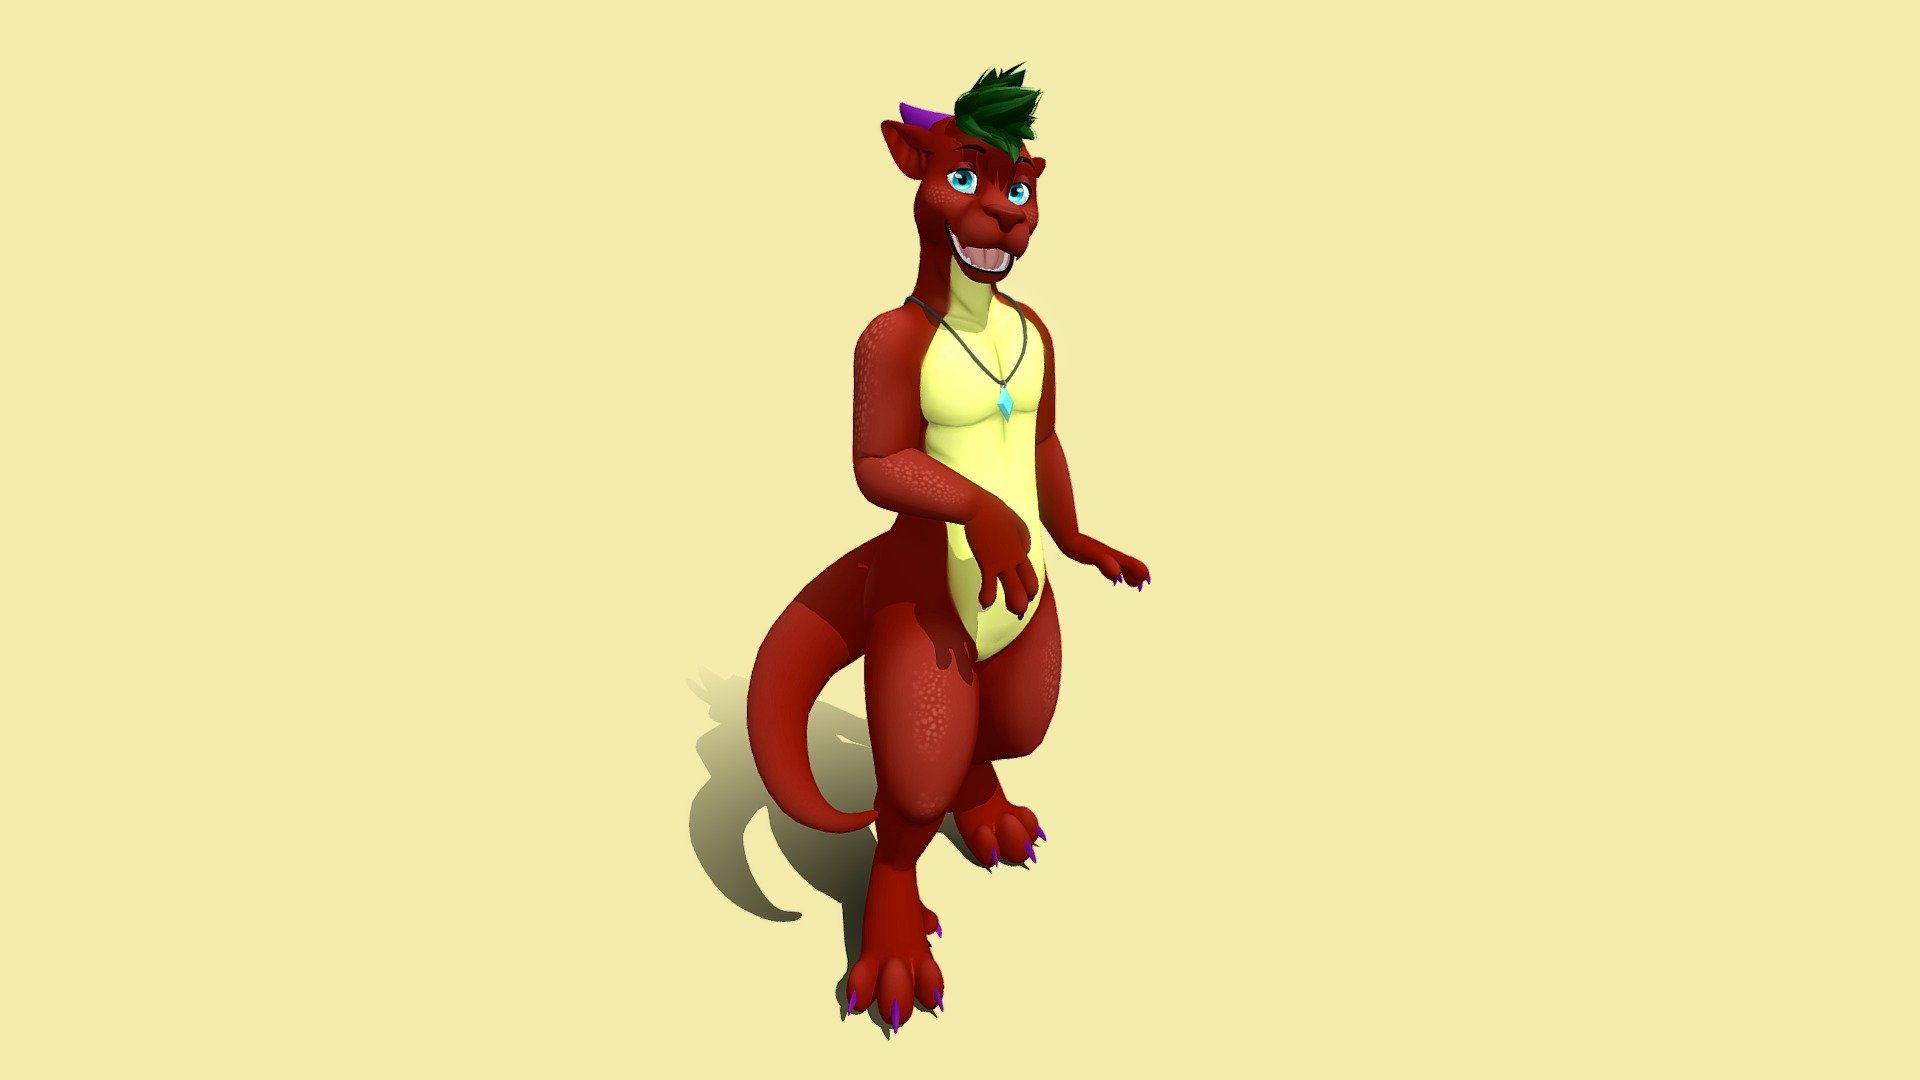 A VR avatar made for Kayron the kobold! Includes an outfit and accessories, body and face emotes :)

Mesh made in Blender, textured in SAI2

This was made as a custom commission and is not downloadable publicly. Thank you!! For custom commission status, check out my telegram channel t.me/Meelo3D - Kayron VRChat Avatar - 3D model by Meelo 3d model